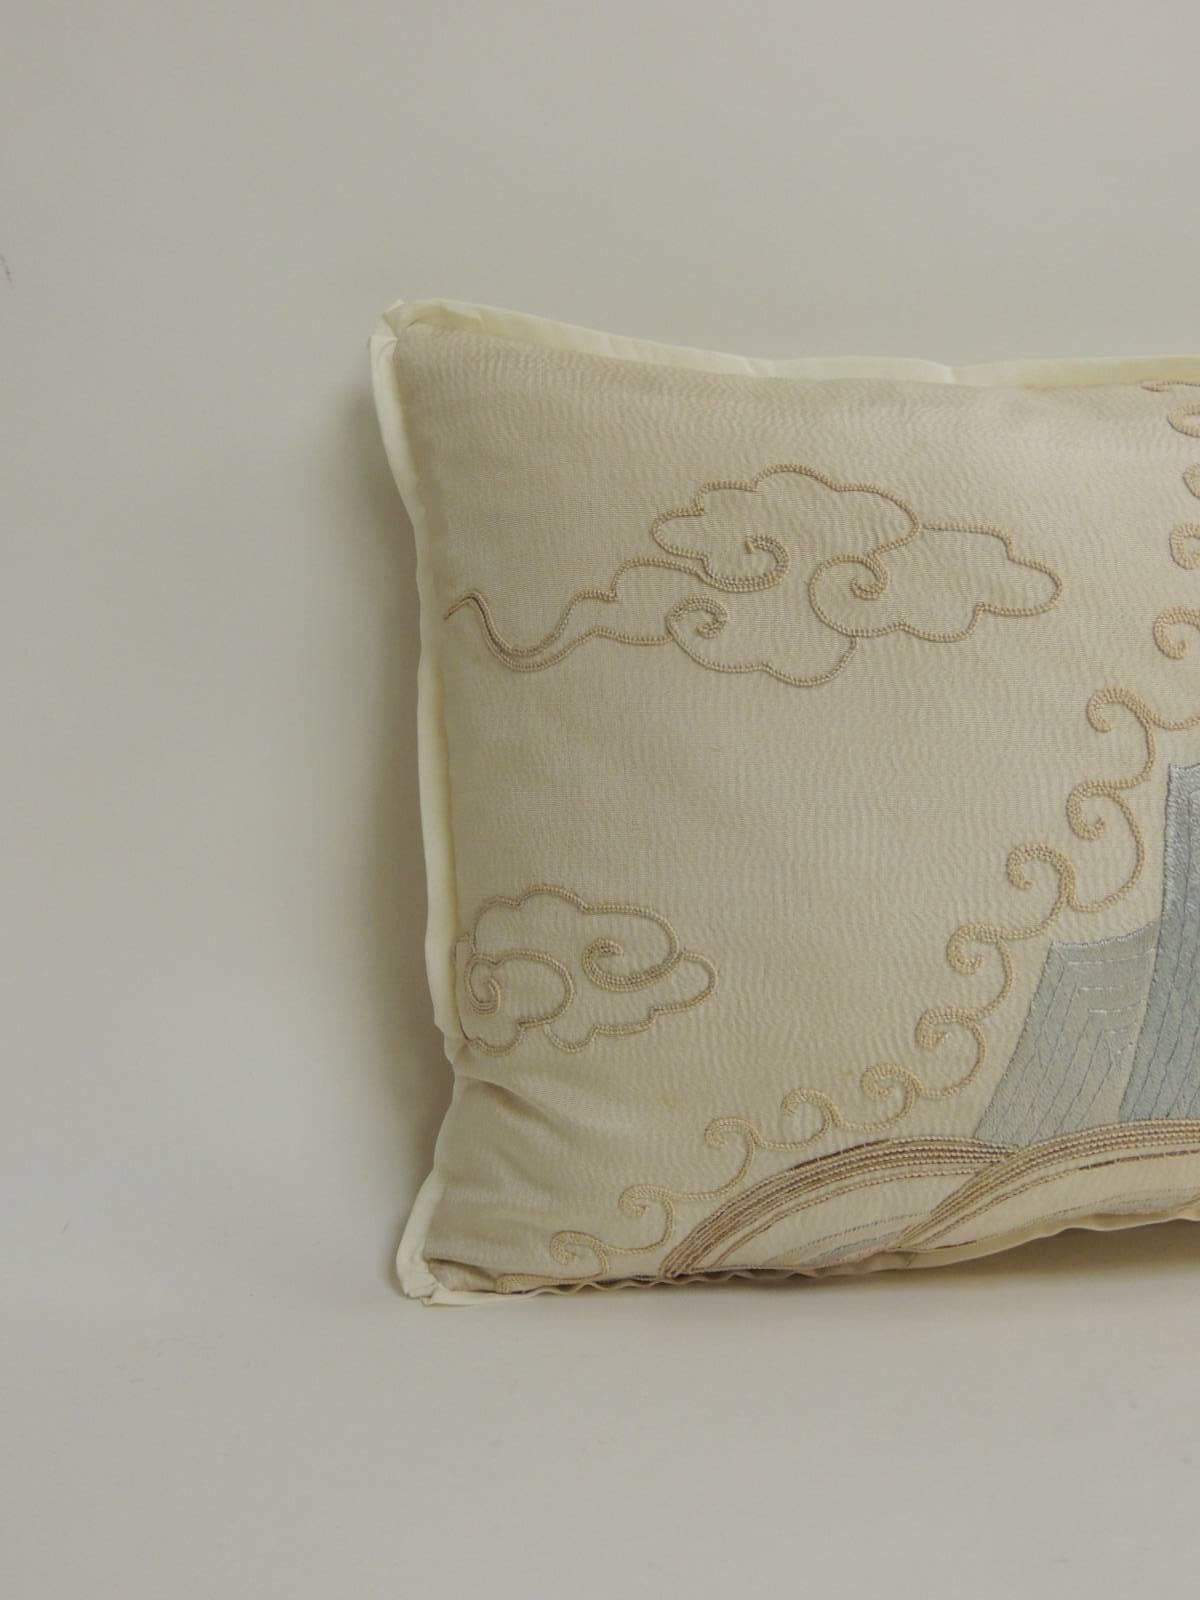 19th century Asian embroidered deco silk dragon embroidered on bolster decorative pillow. Decorative pillow embellished with an antique silver metallic trim. A.T.G. custom flat trim and ecru silk backing. Accent bolster pillow hand-crafted and